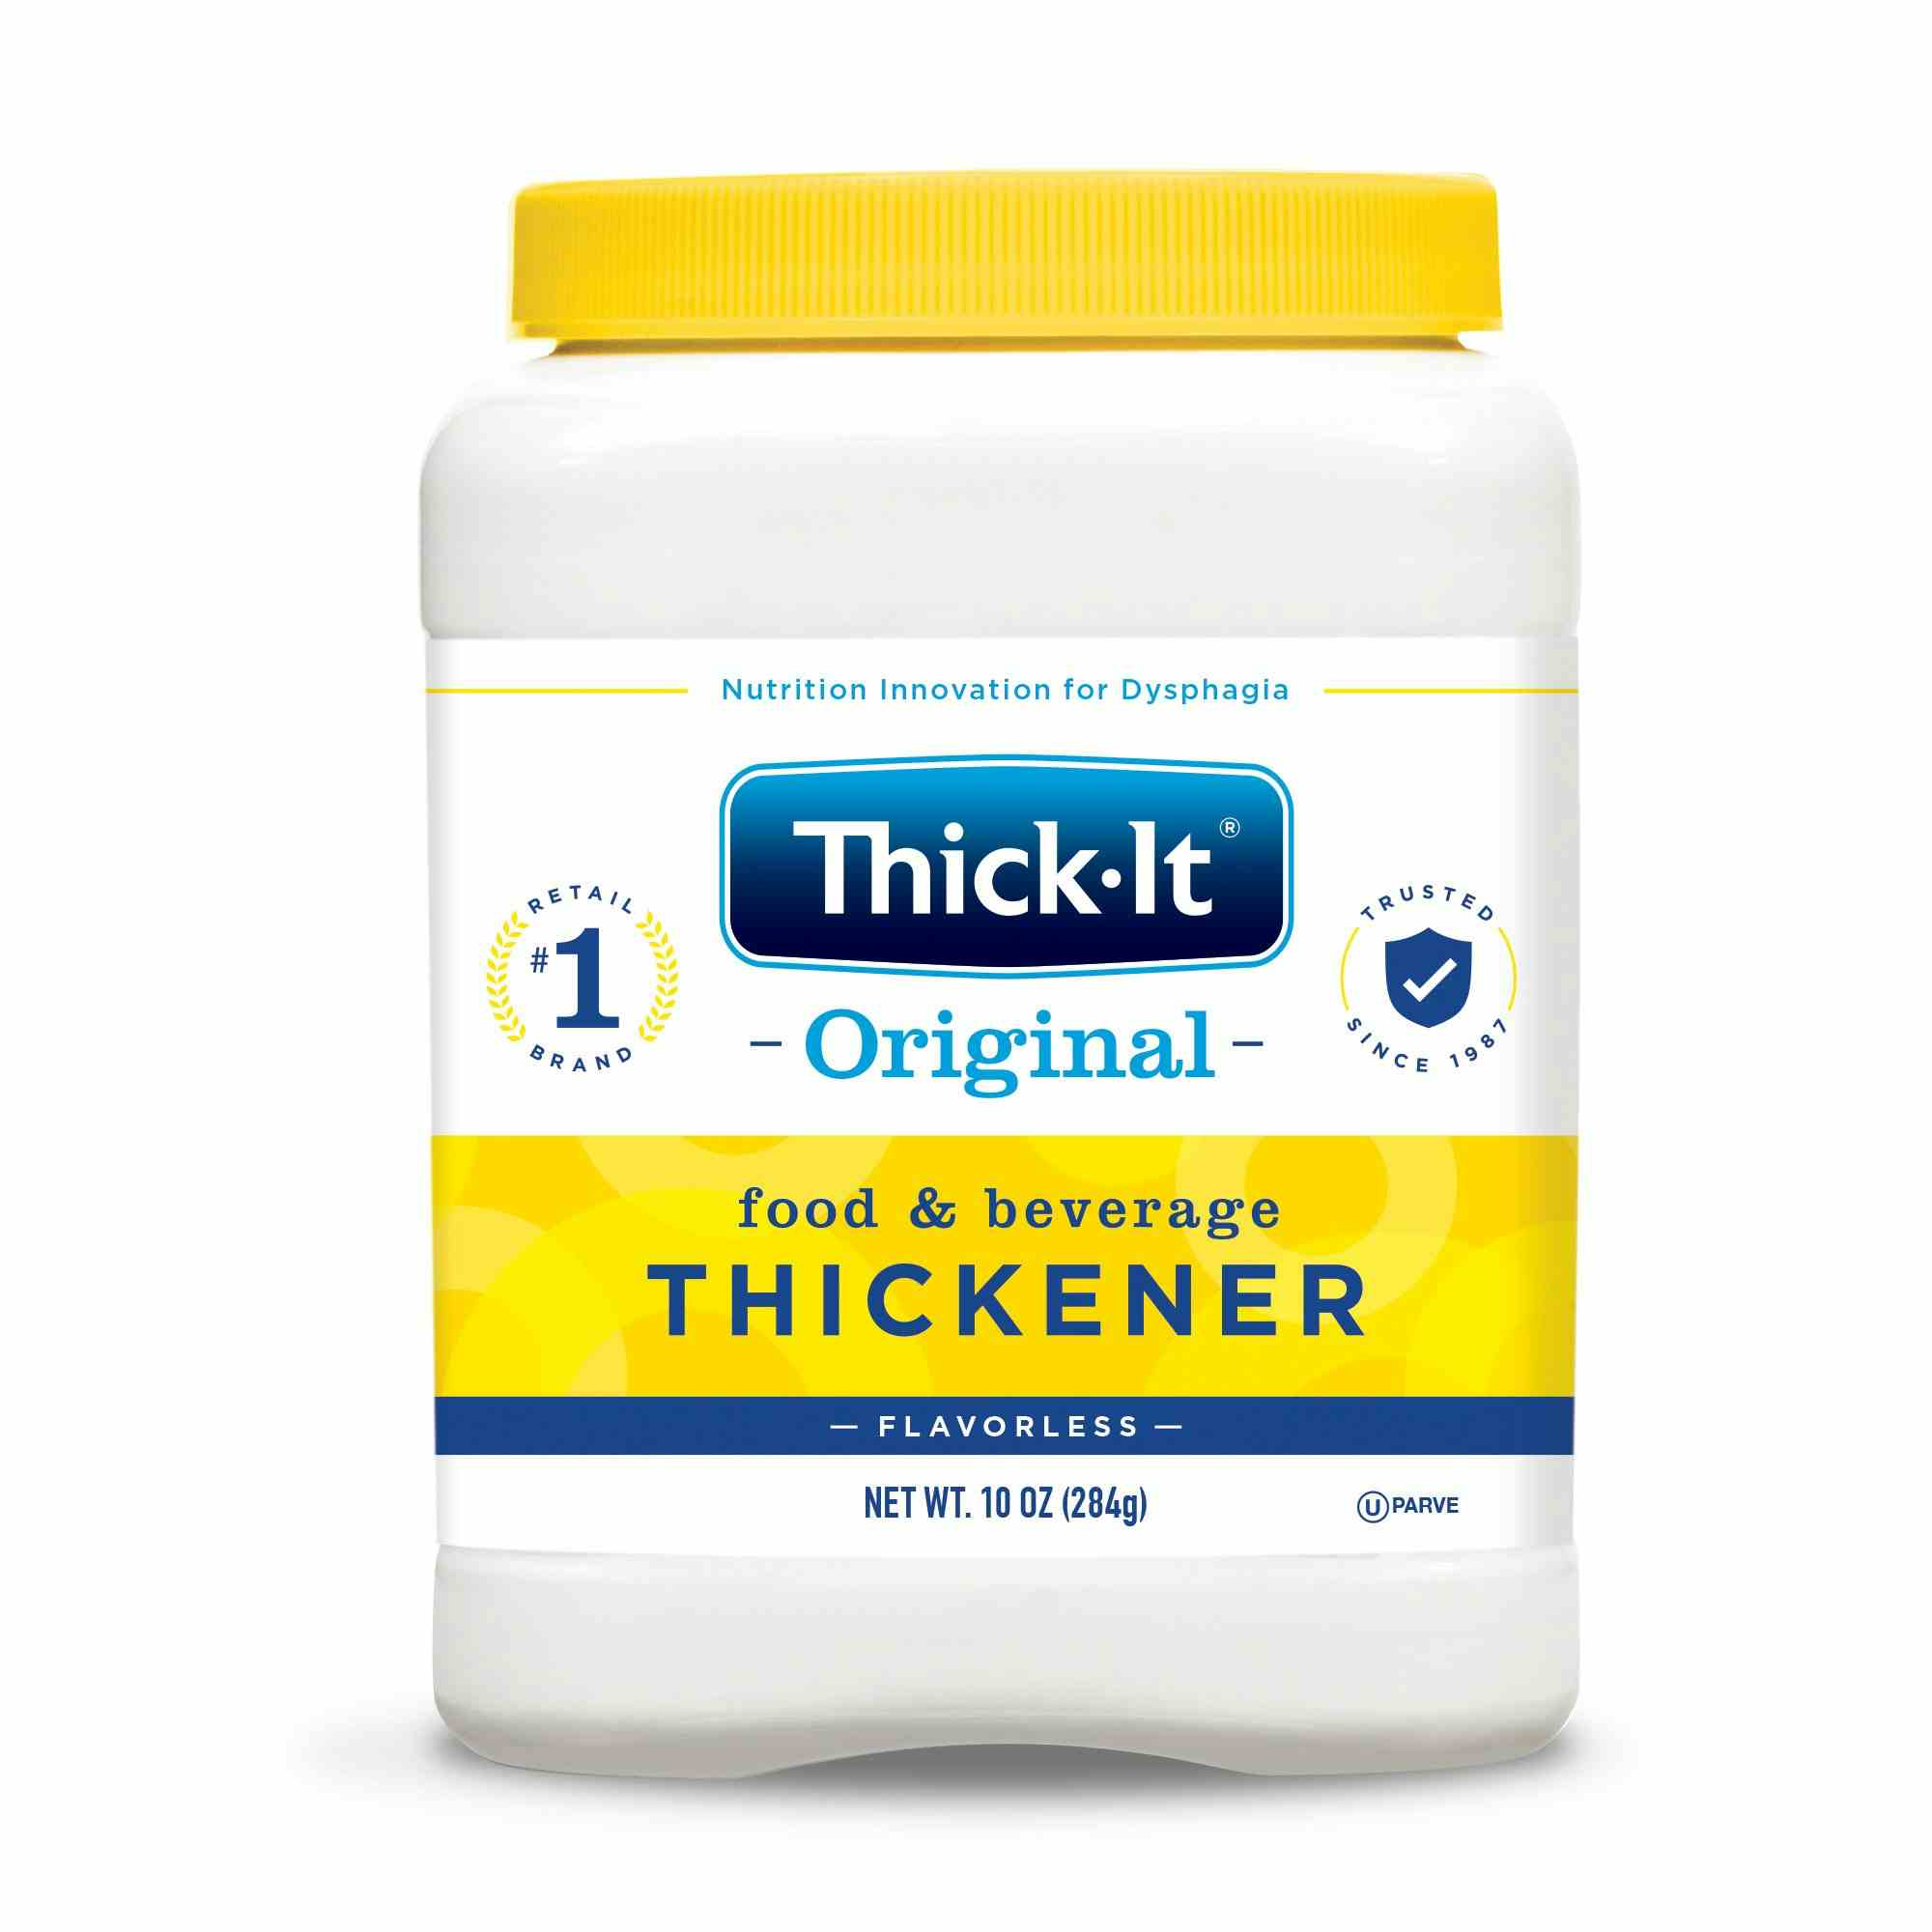 Thick-It Food and Beverage Thickener Original, Unflavored Powder, 10 oz, Canister , J584-H5800, Case of 6 Canisters